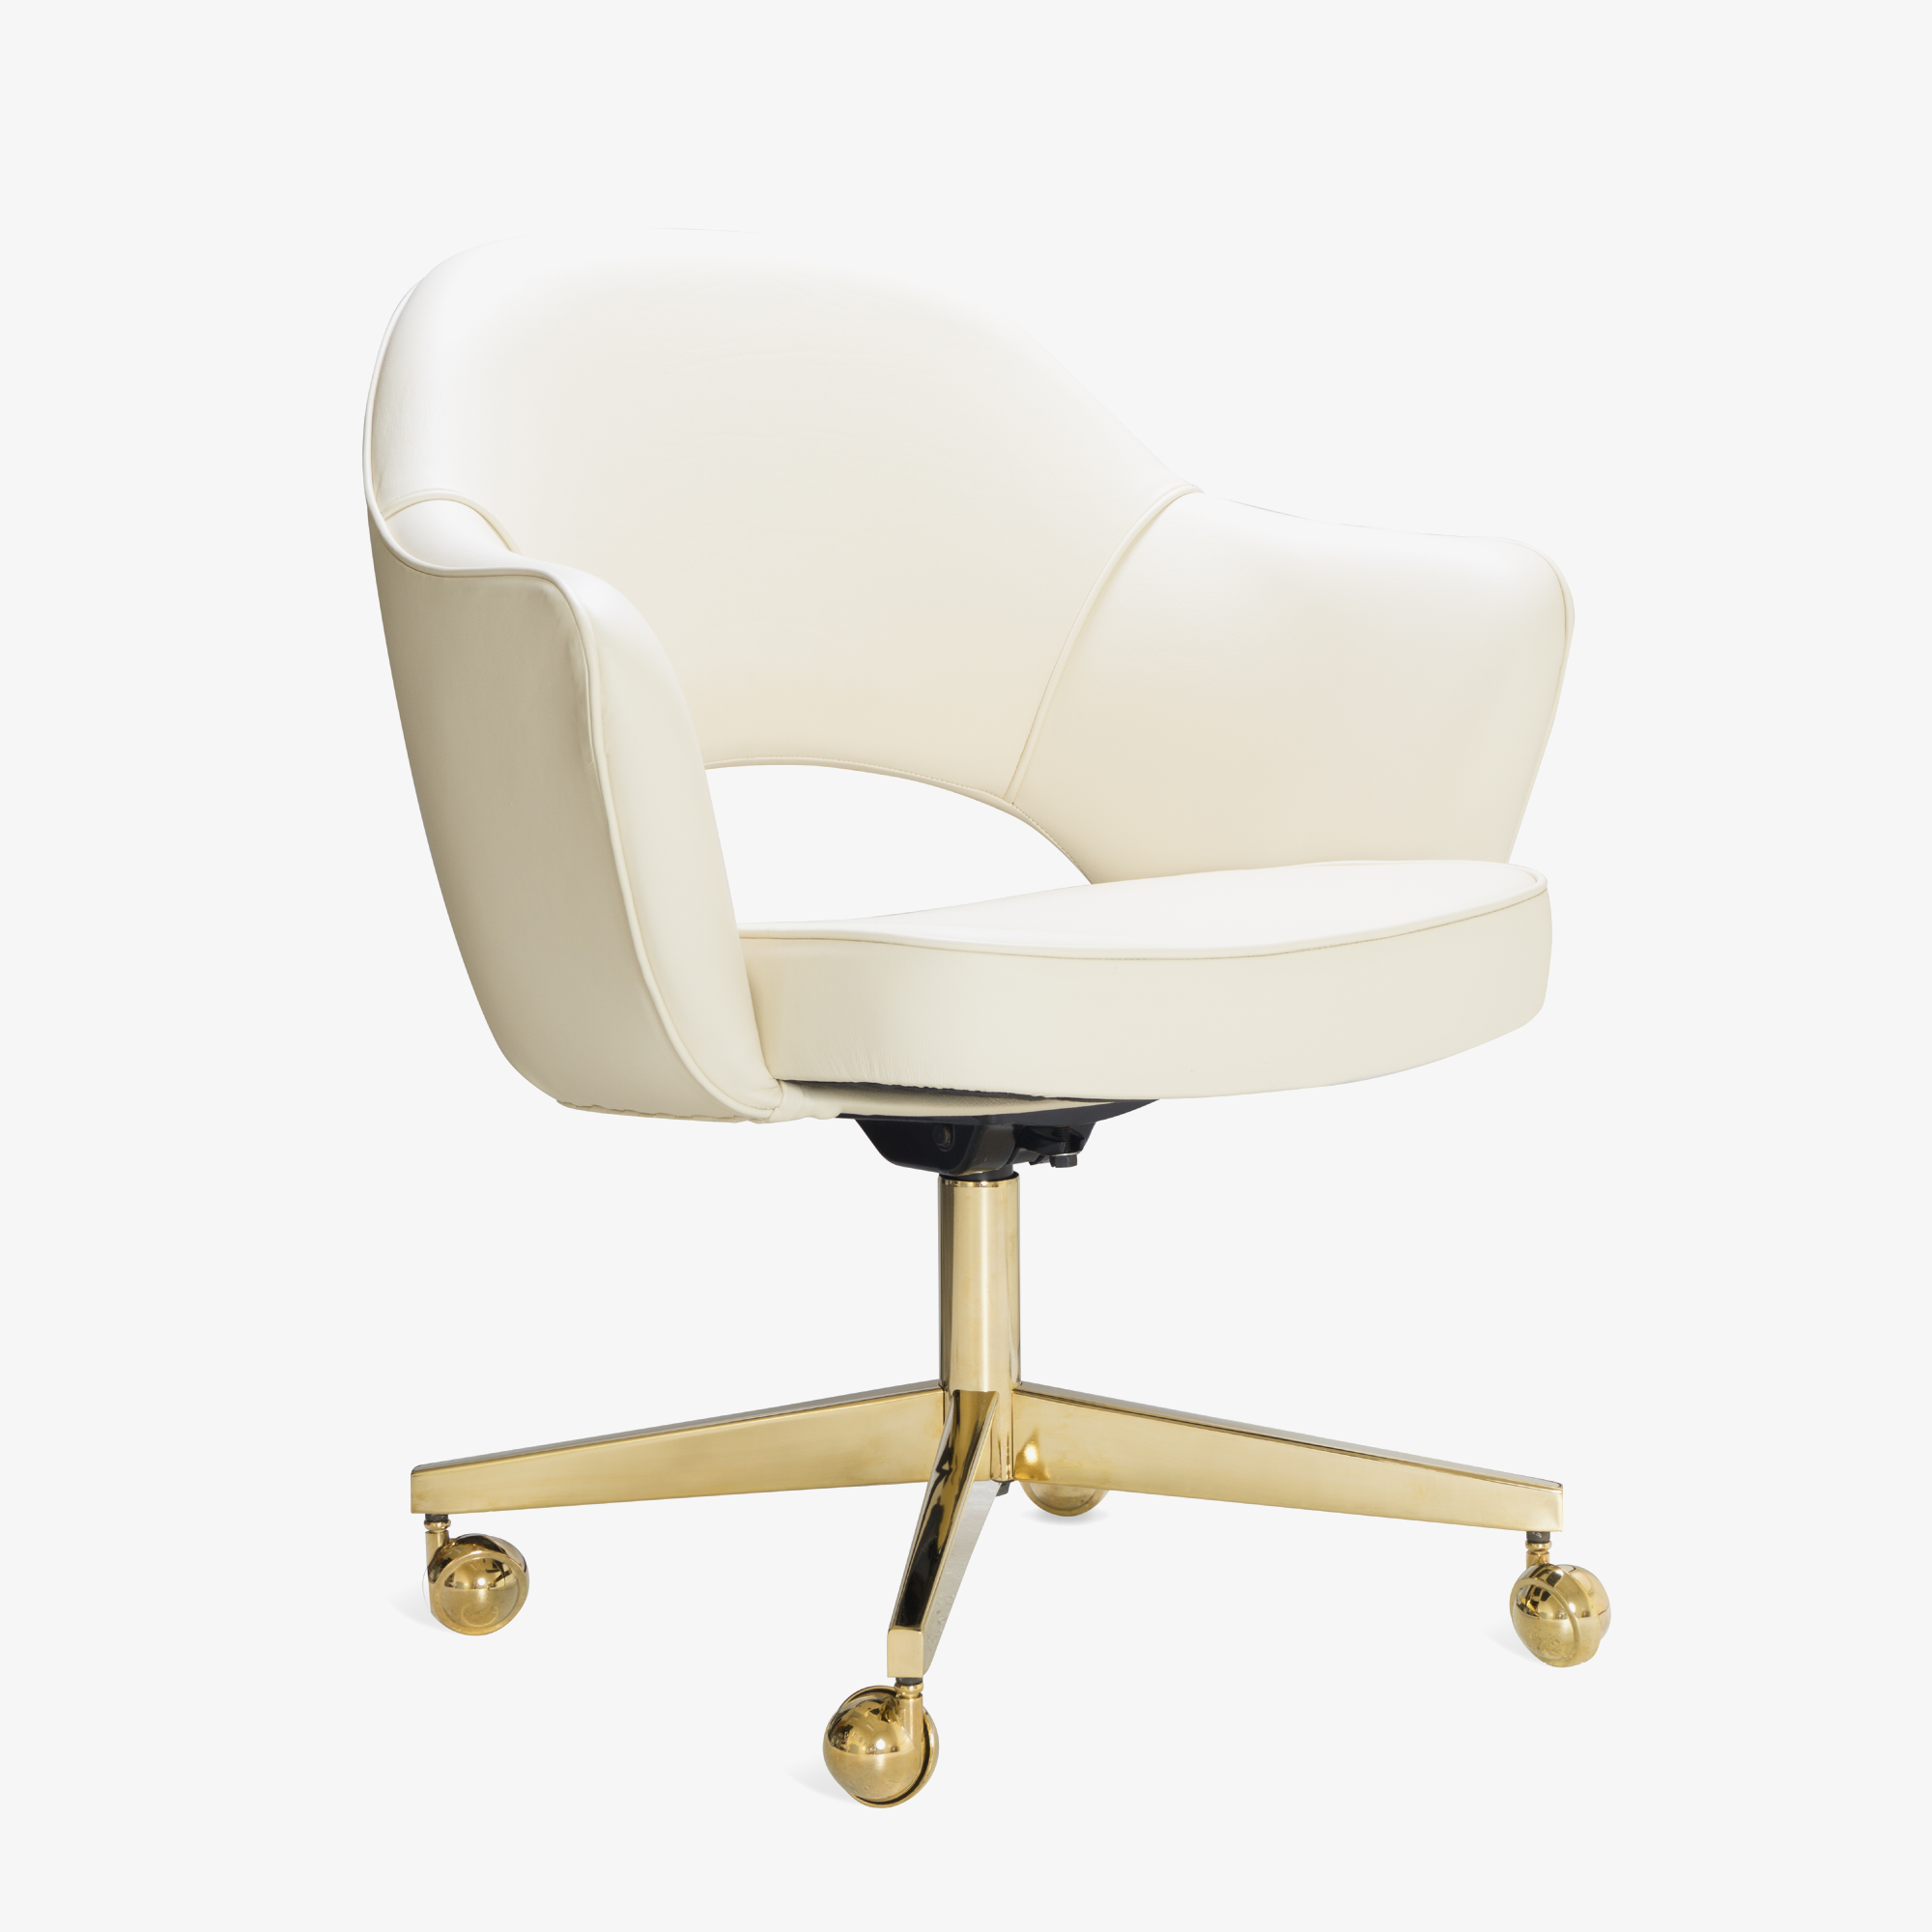 Saarinen Executive Arm Chair in Creme Leather, Swivel Base, 24k Gold Edition.png